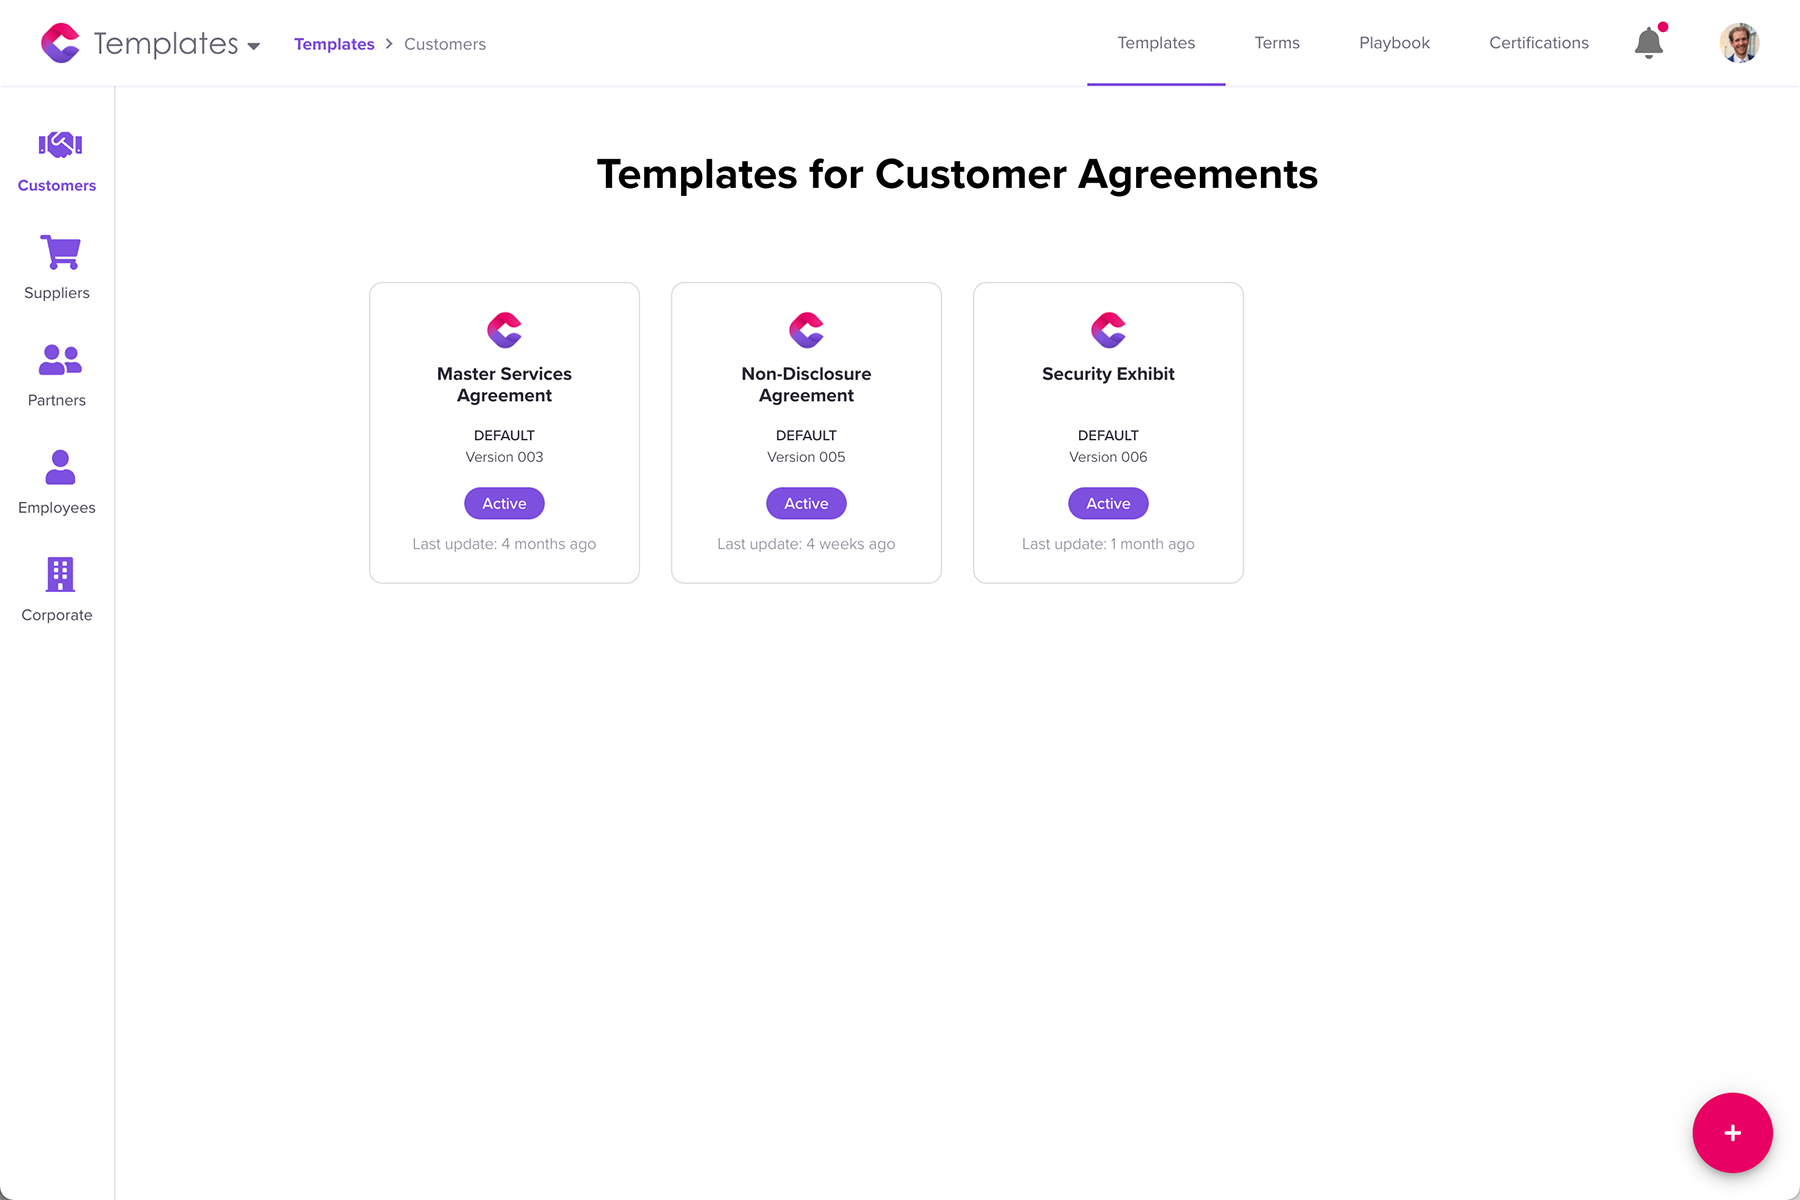 Manage your templates and contracts.